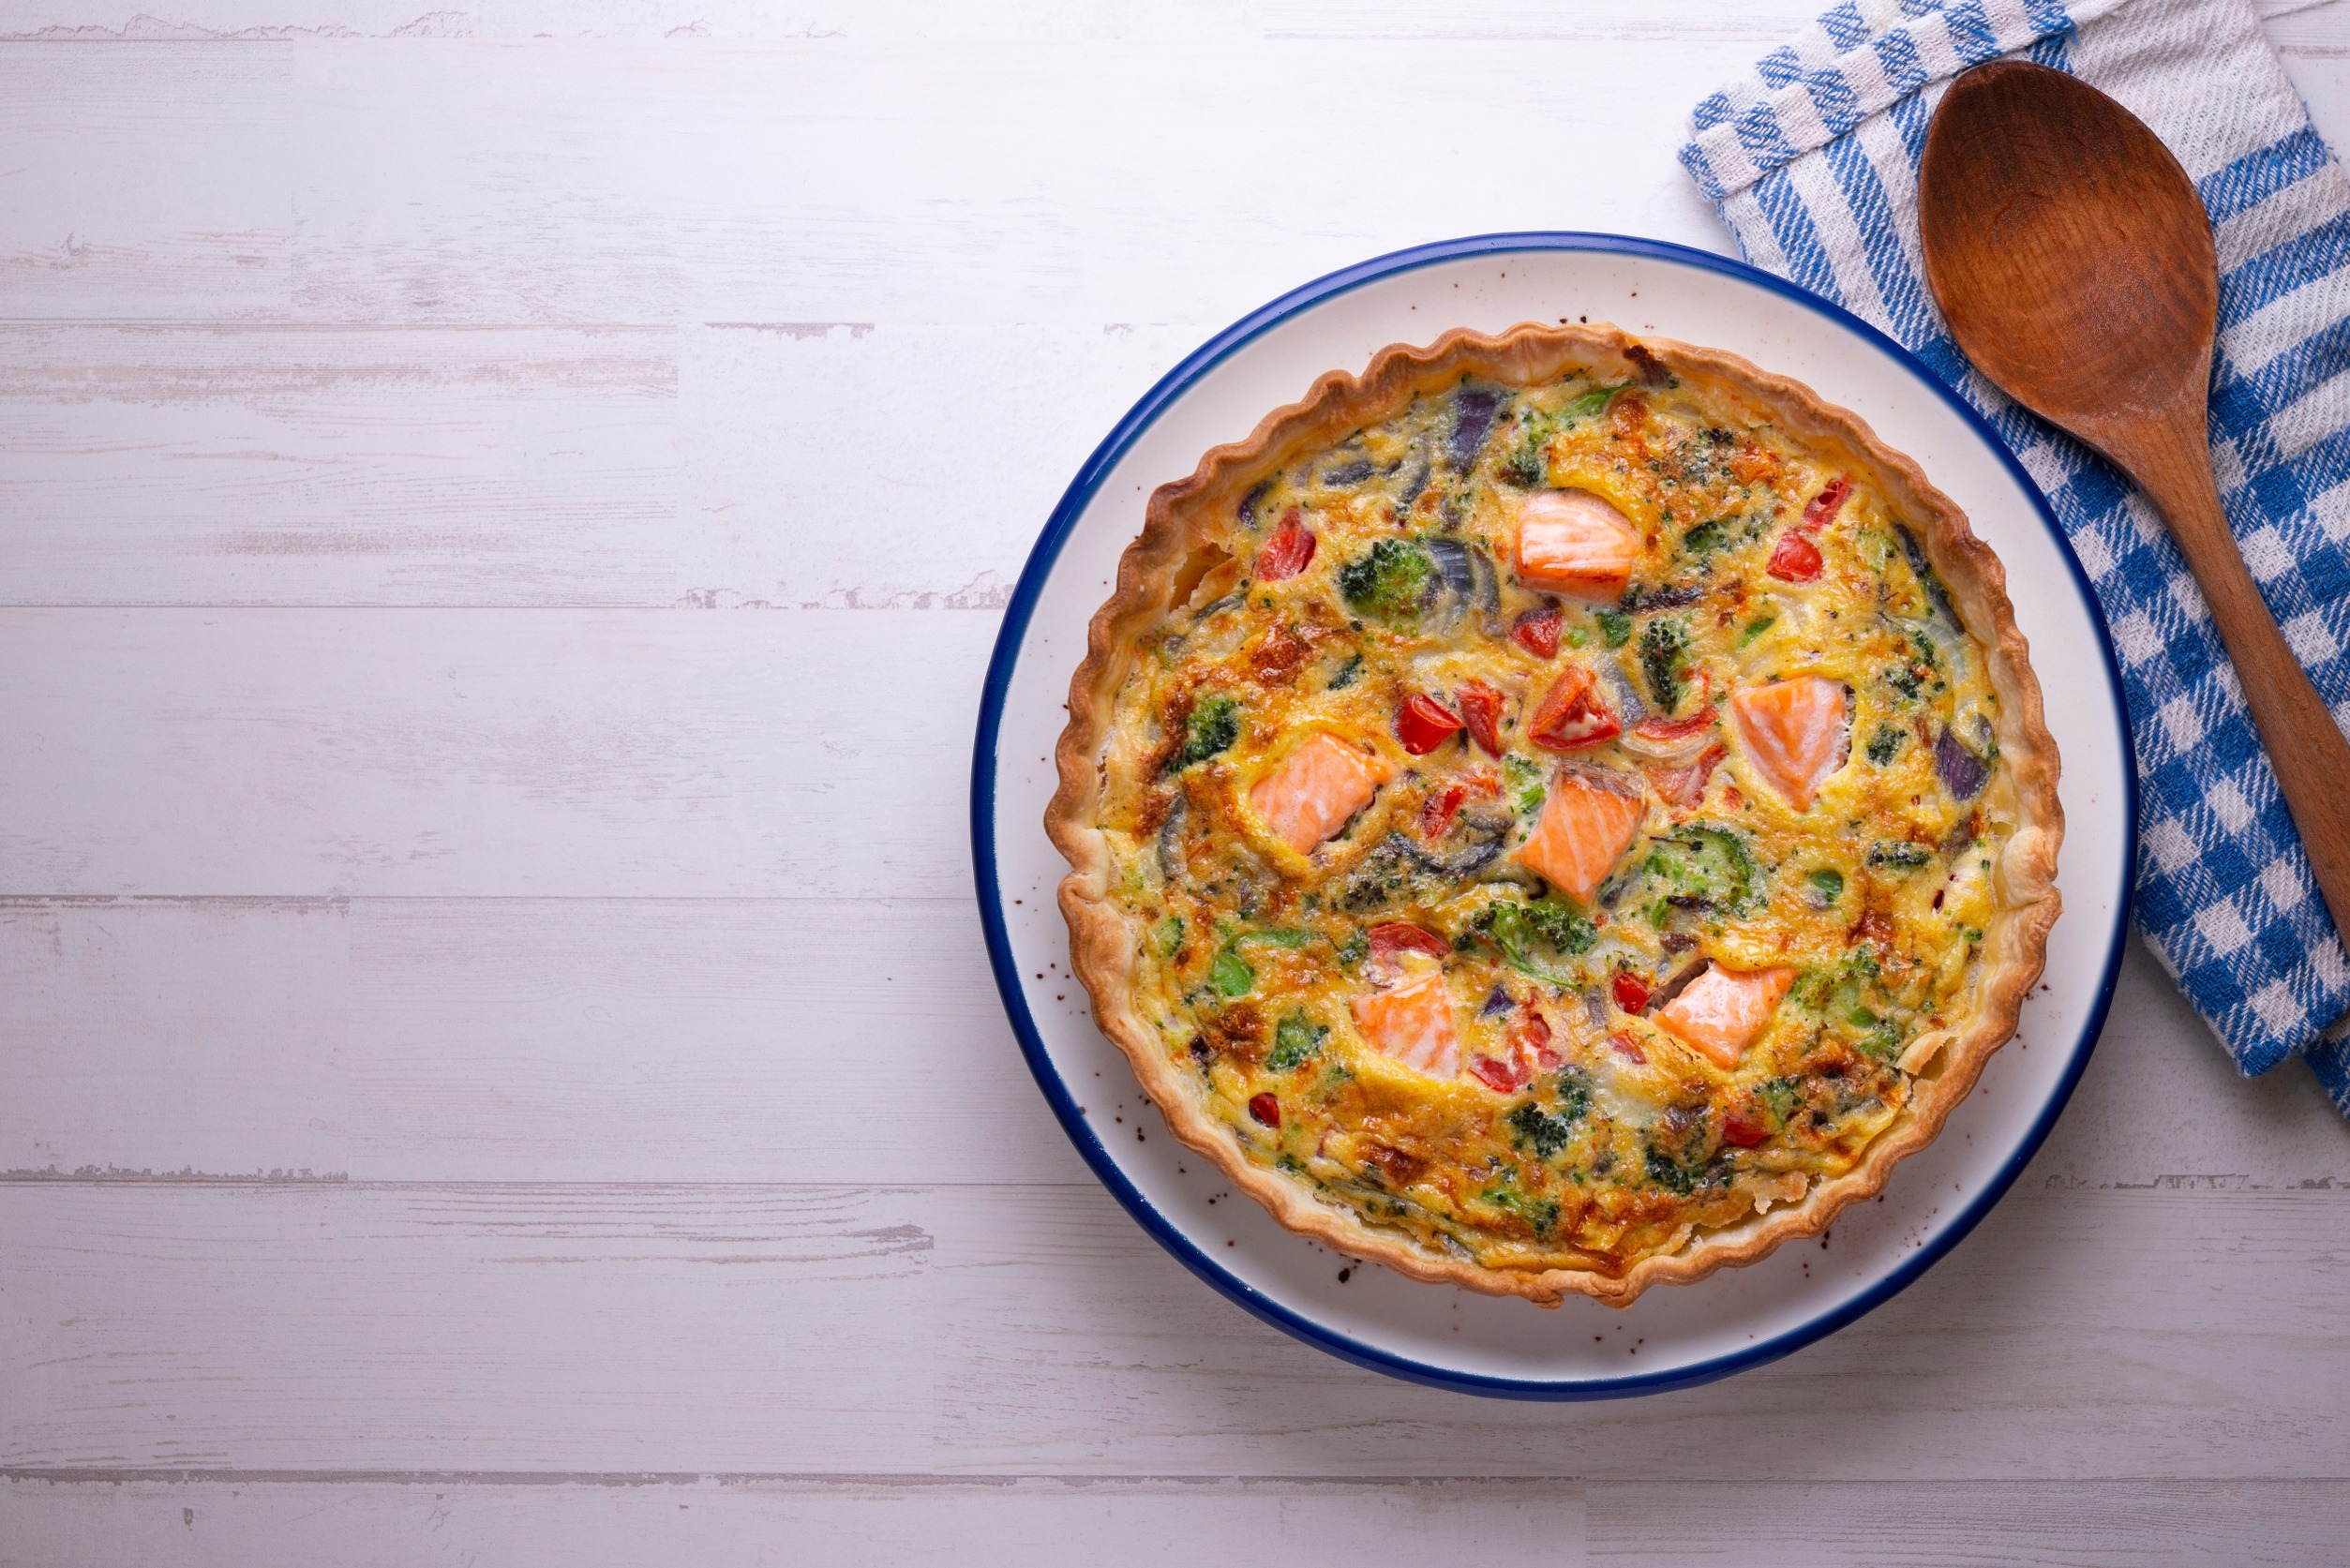 salmon quiche with broccoli and vegetables